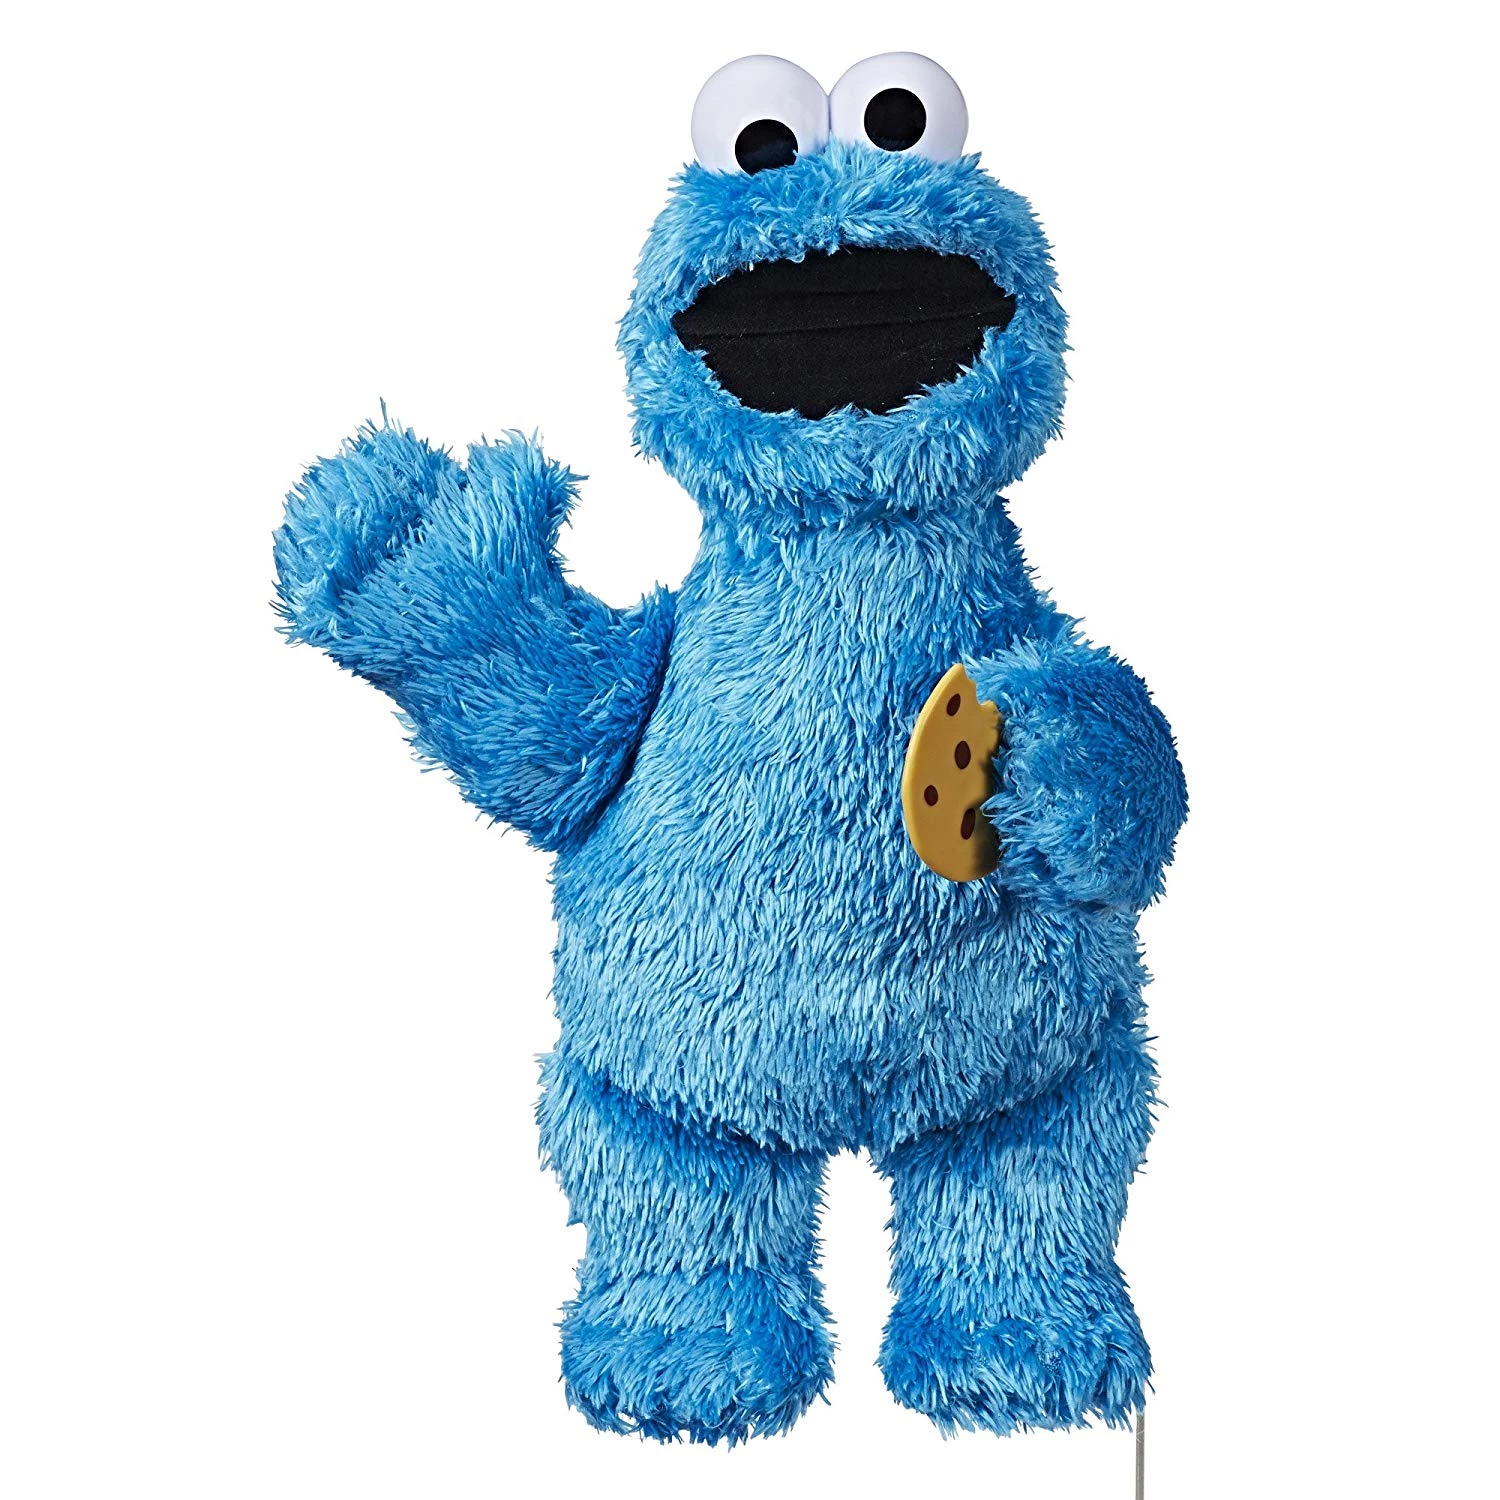 10. For the Toddler of a Film or TV Nerd: Feed Me Cookie Monster